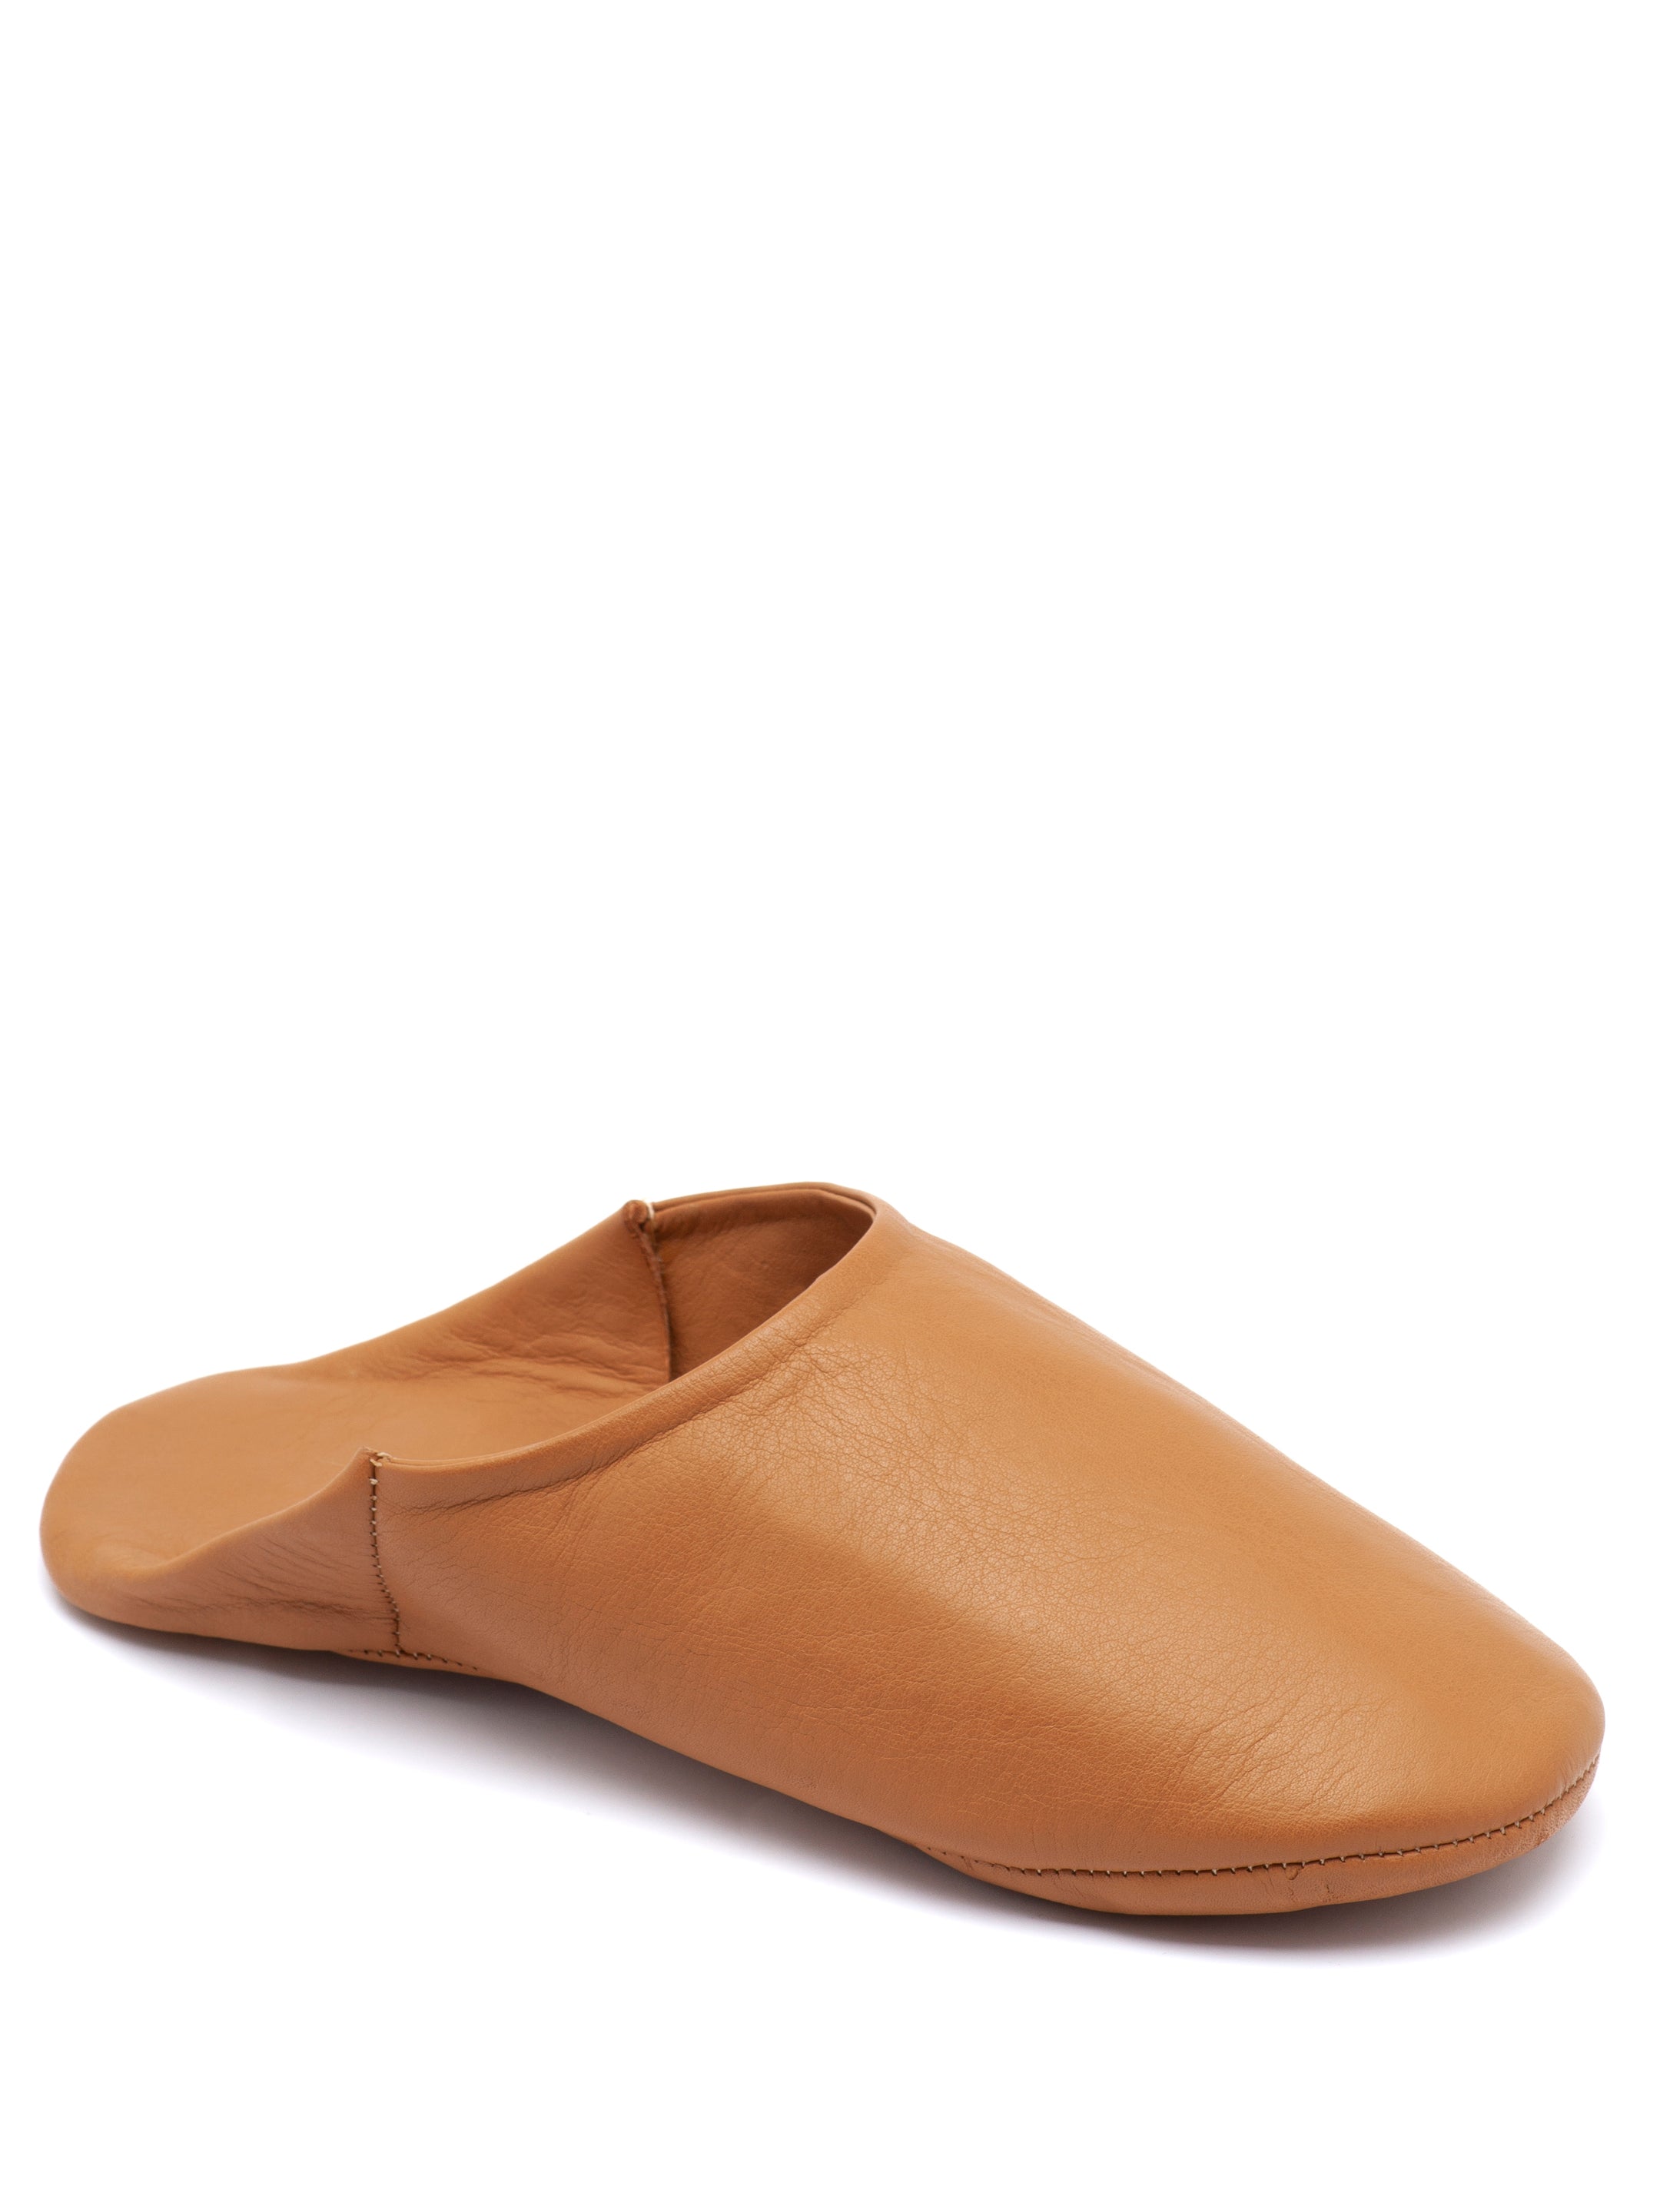 Caramel Brew - Leather Slippers